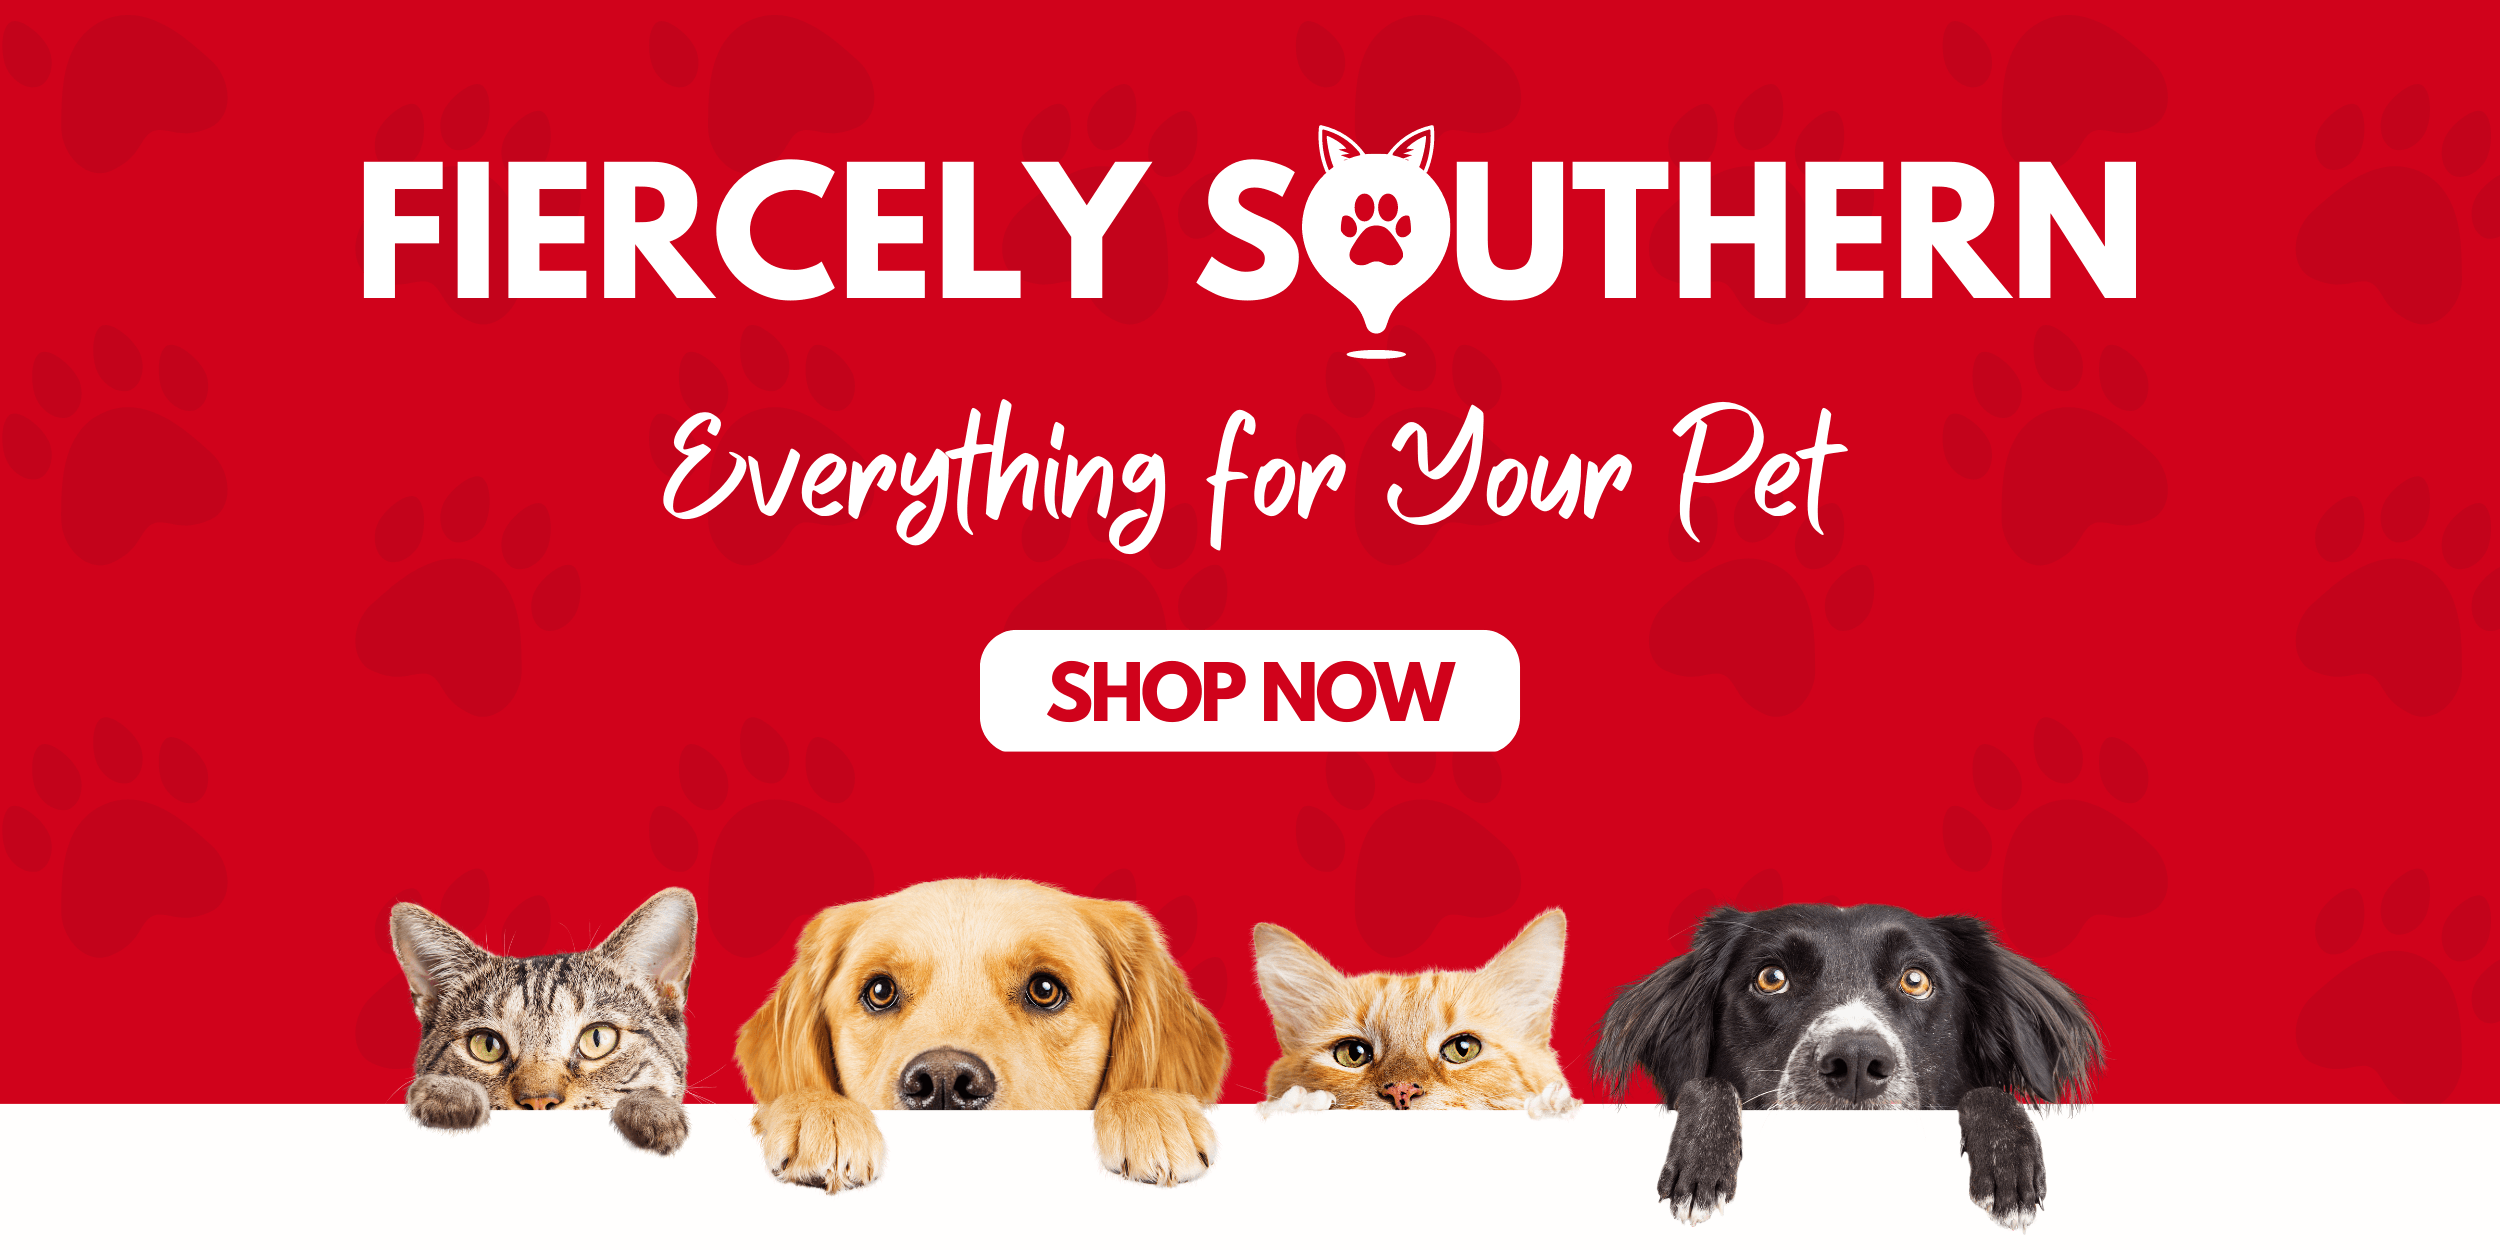 5 - Shop now, Fiercely Southern's Brand Banner featuring cats & dogs